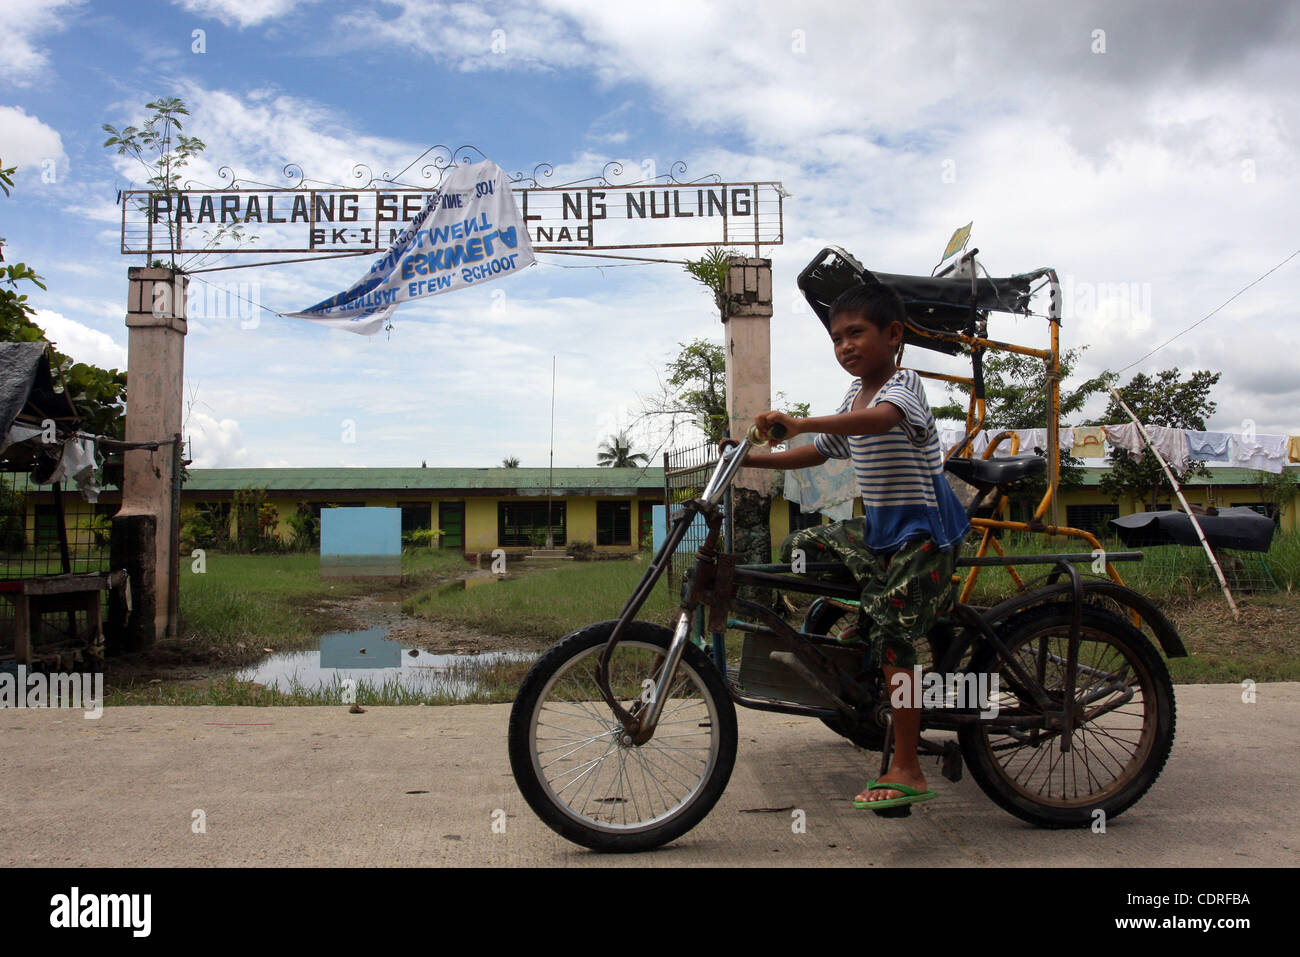 Jul 1, 2011 - Sultan Kudarat, Philippines - A public school remains closed in the southern town of Sultan Kudarat in the southern Philippines, Friday after although flood waters in the region caused by the clogging of tons of water lilies subsided. In  the city of Davao, flash floods on June 29, 201 Stock Photo